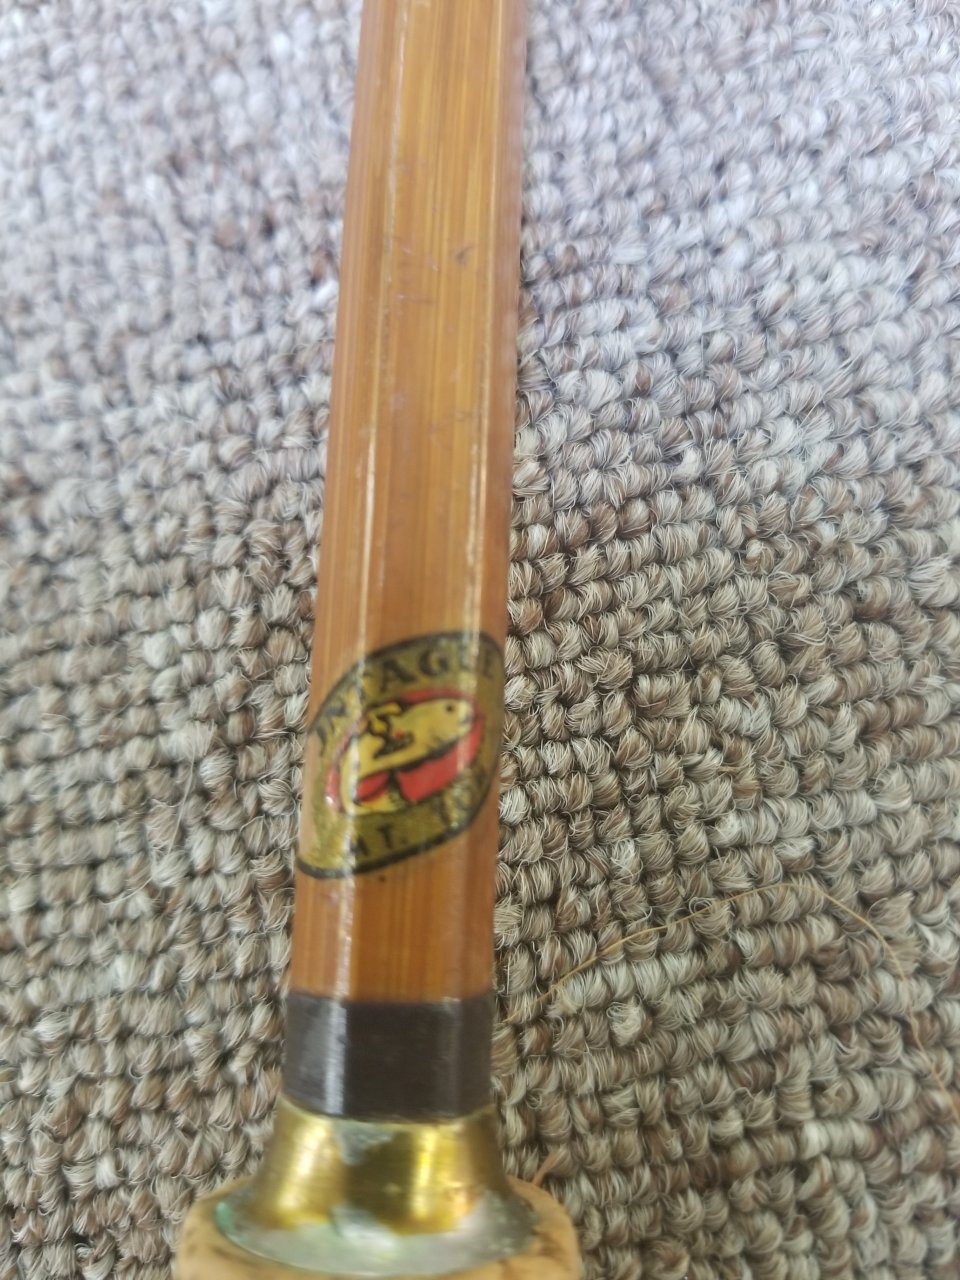 I Recently Purchased This Bamboo Fly Rod But I'm Not Sure Who Made It